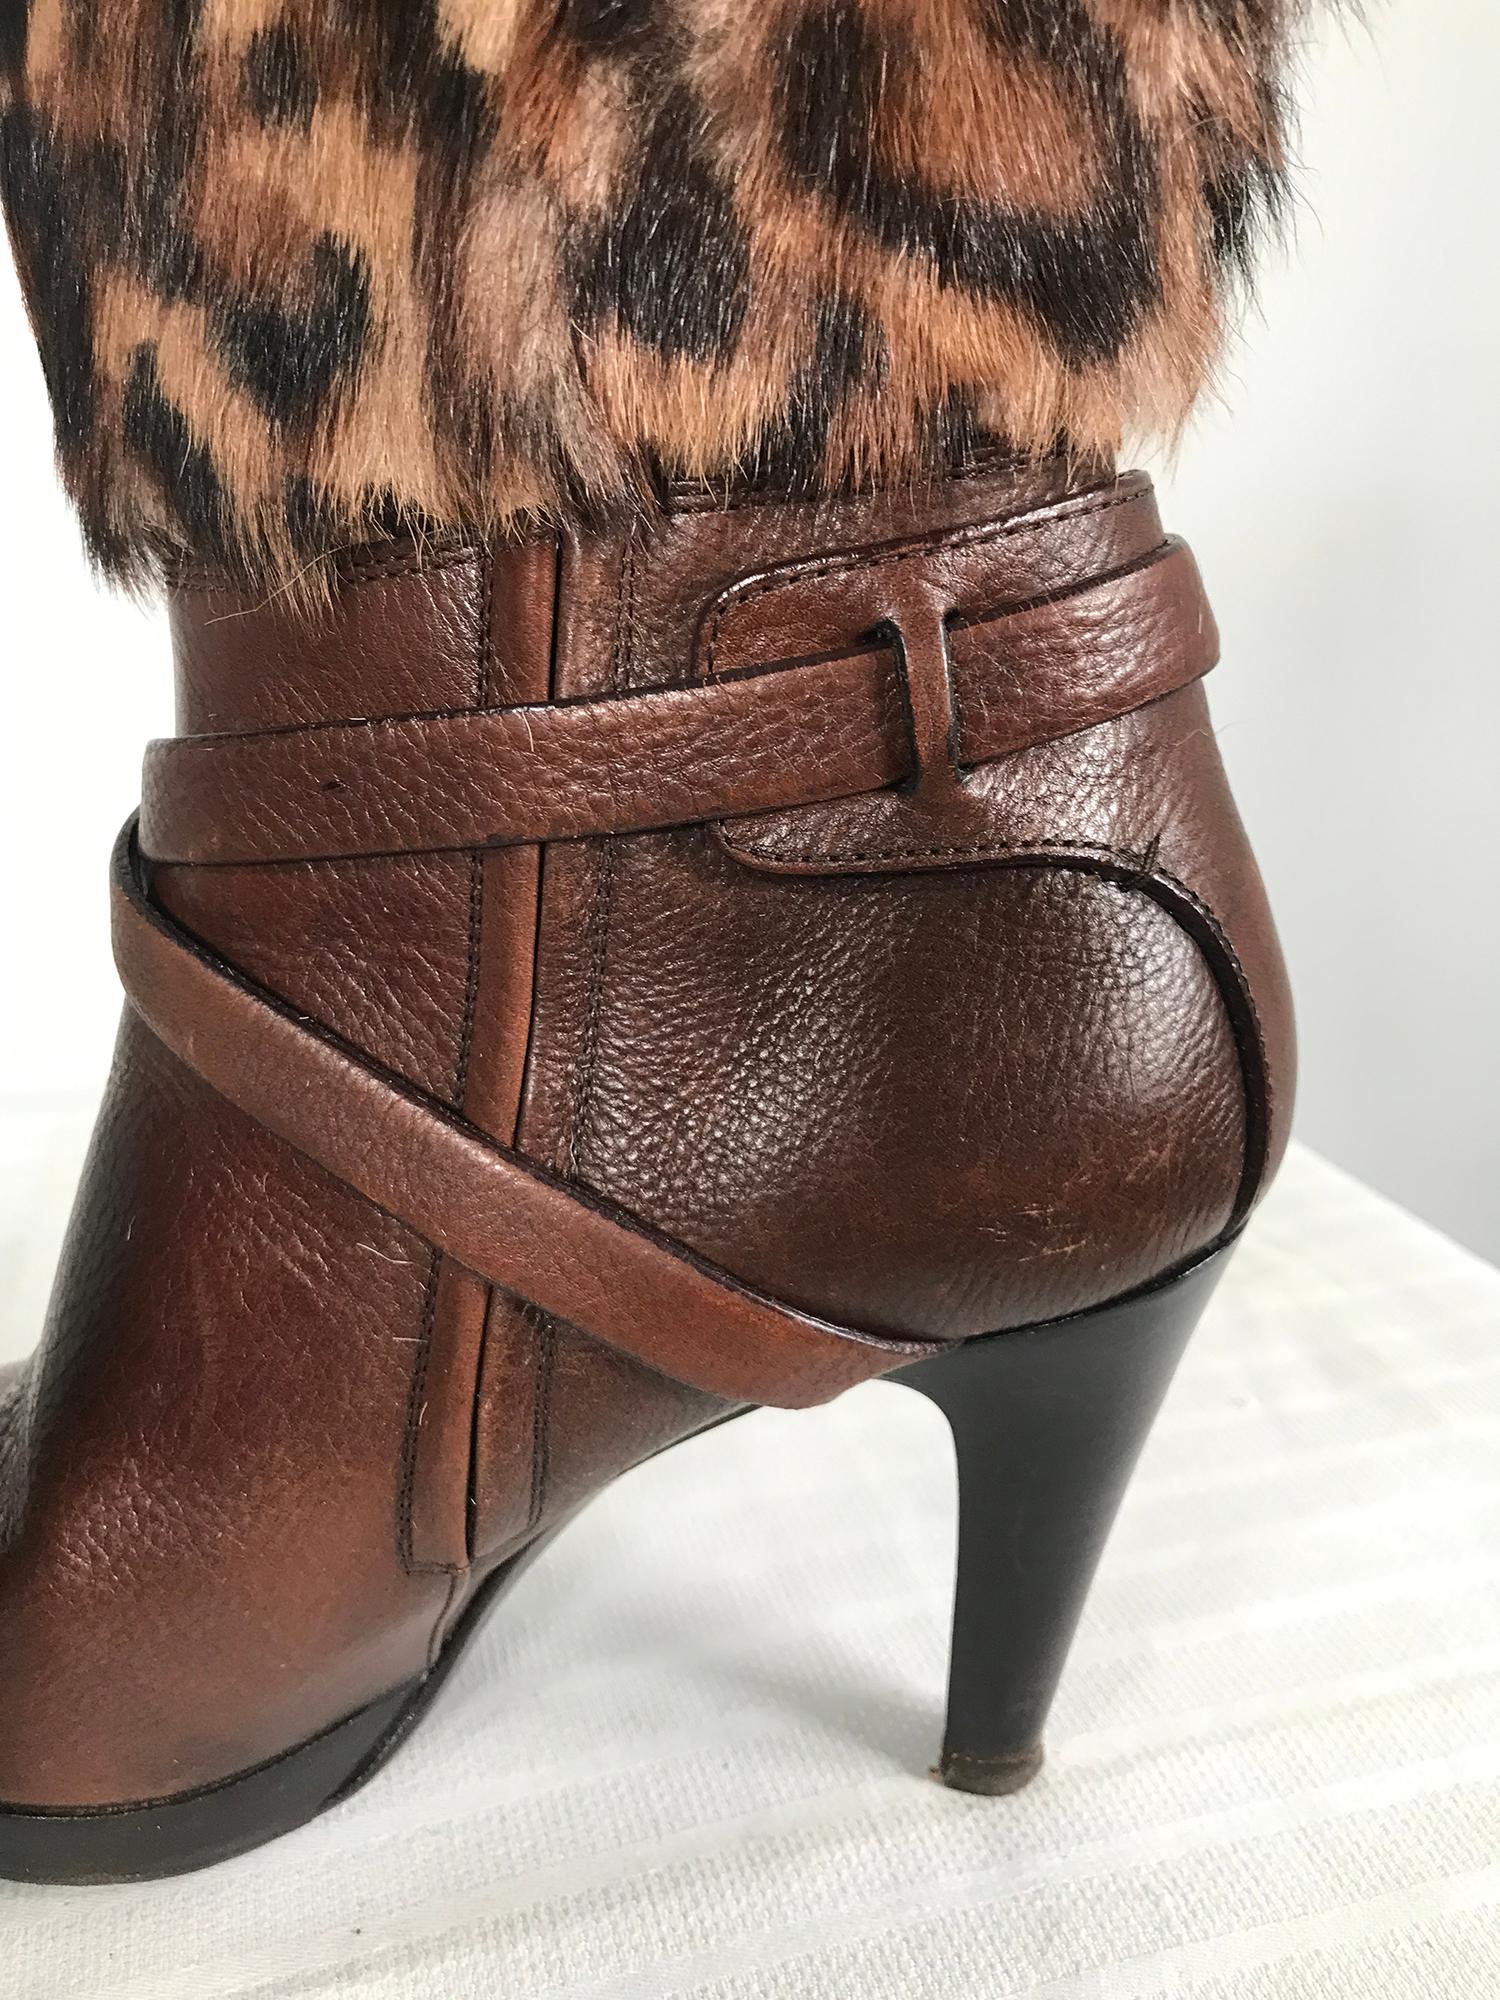 Ralph Lauren Collection Spotted Fur & Leather High Heel Platform Boots 8B In Good Condition In West Palm Beach, FL